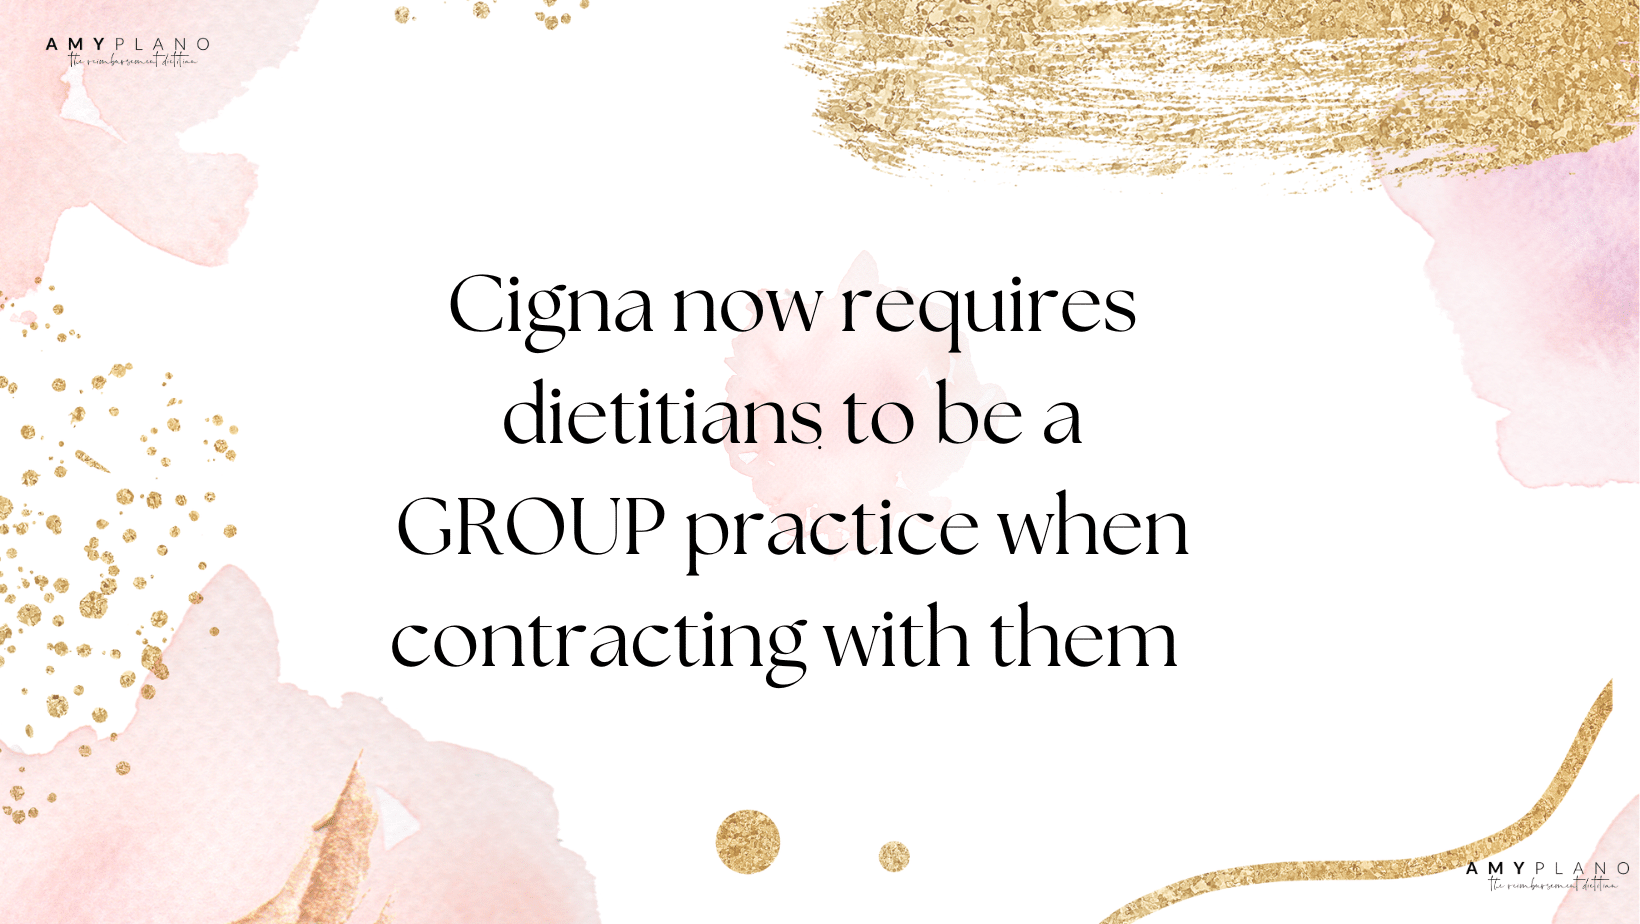 Cigna only credentials dietitians who are a group